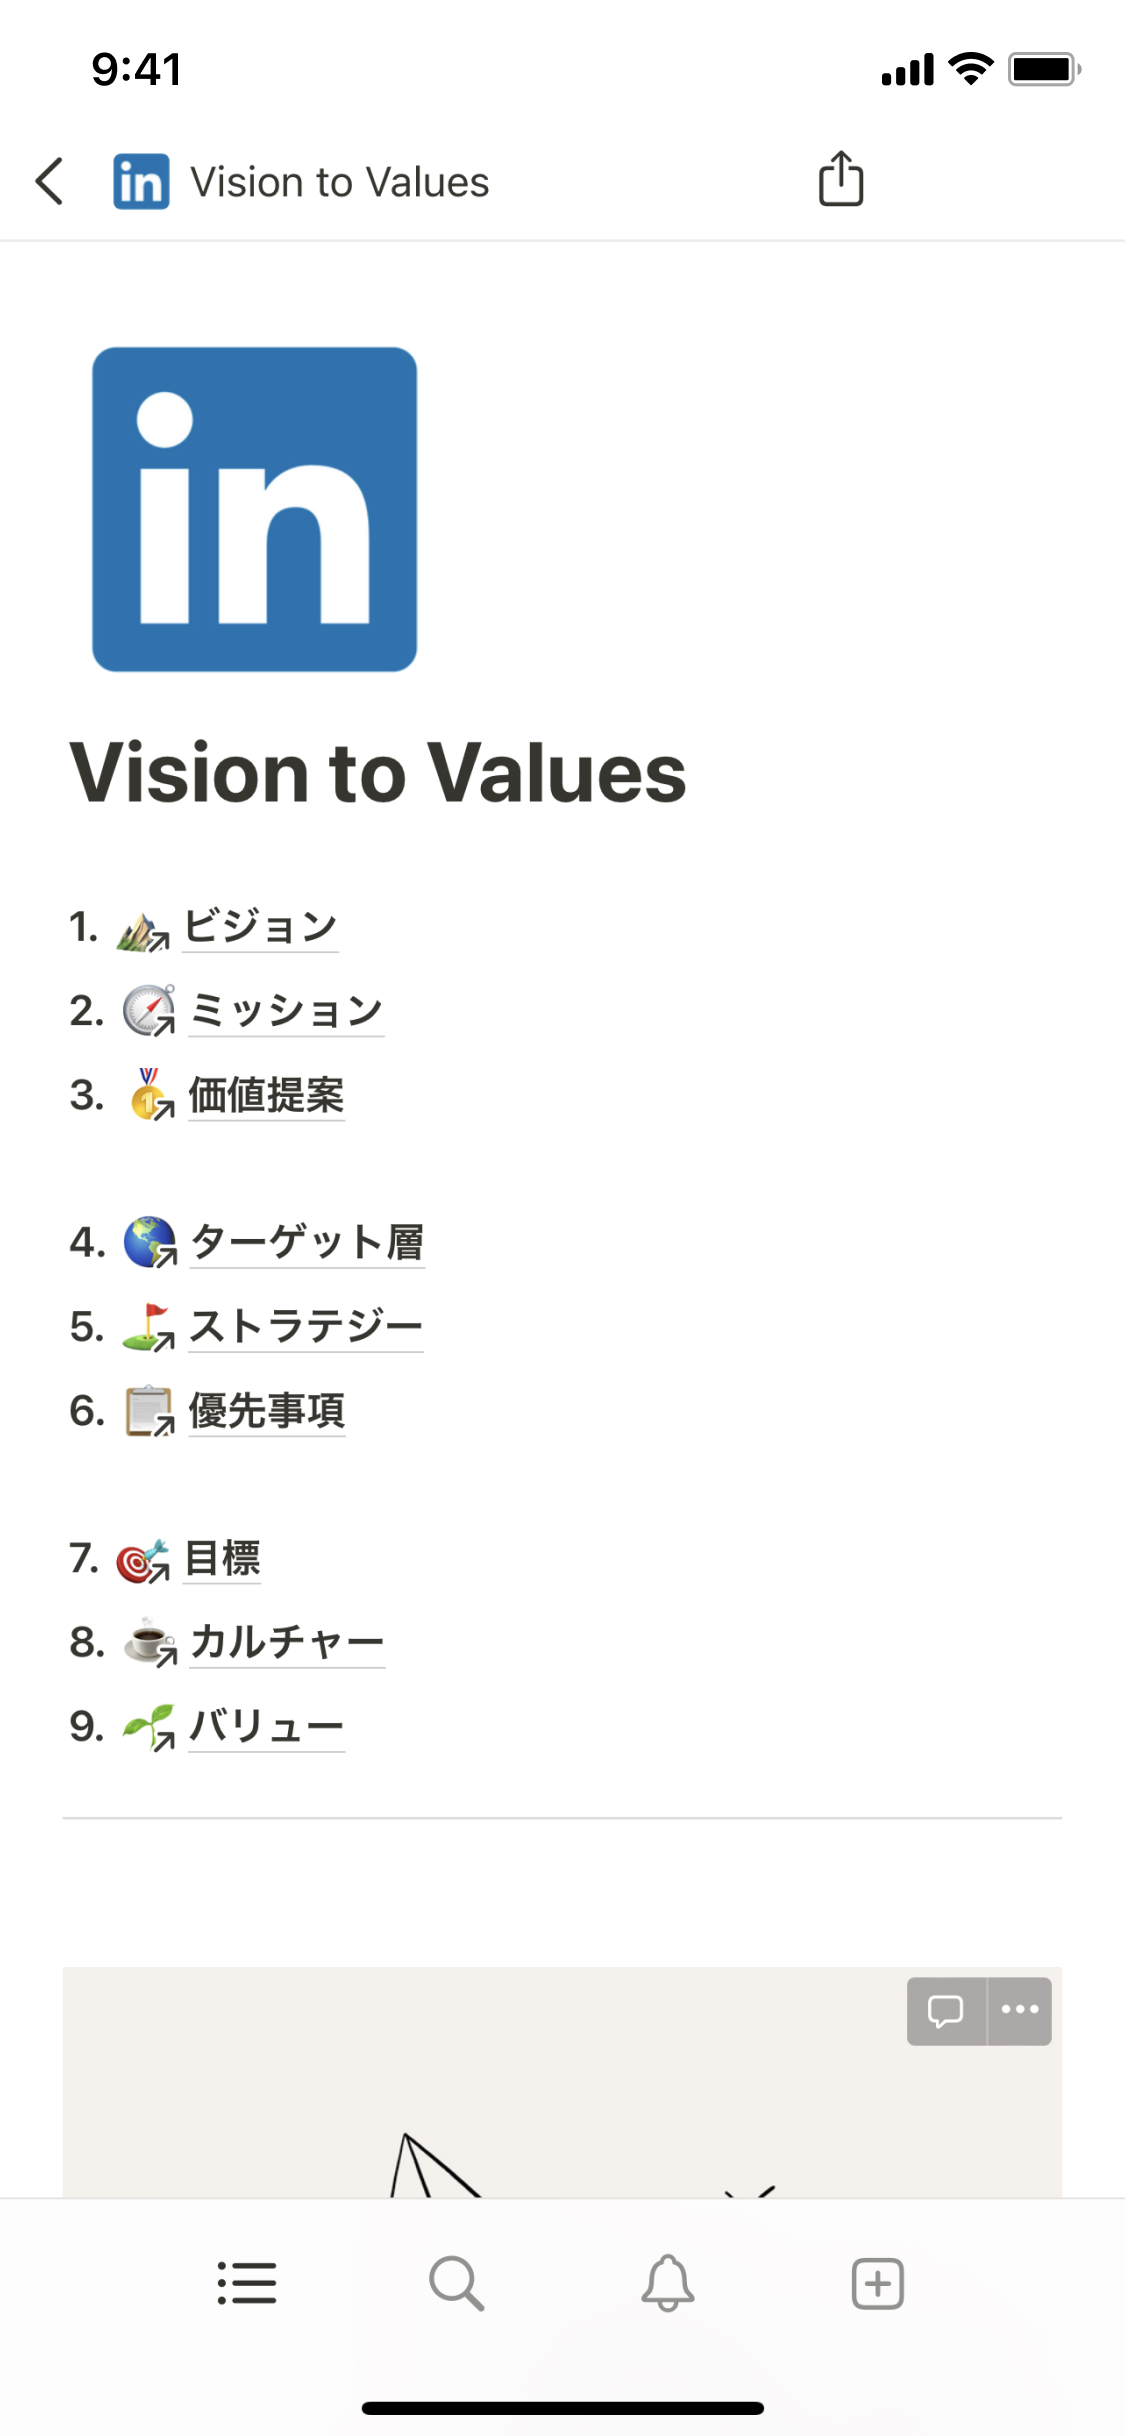 The mobile image for the Vision to values template